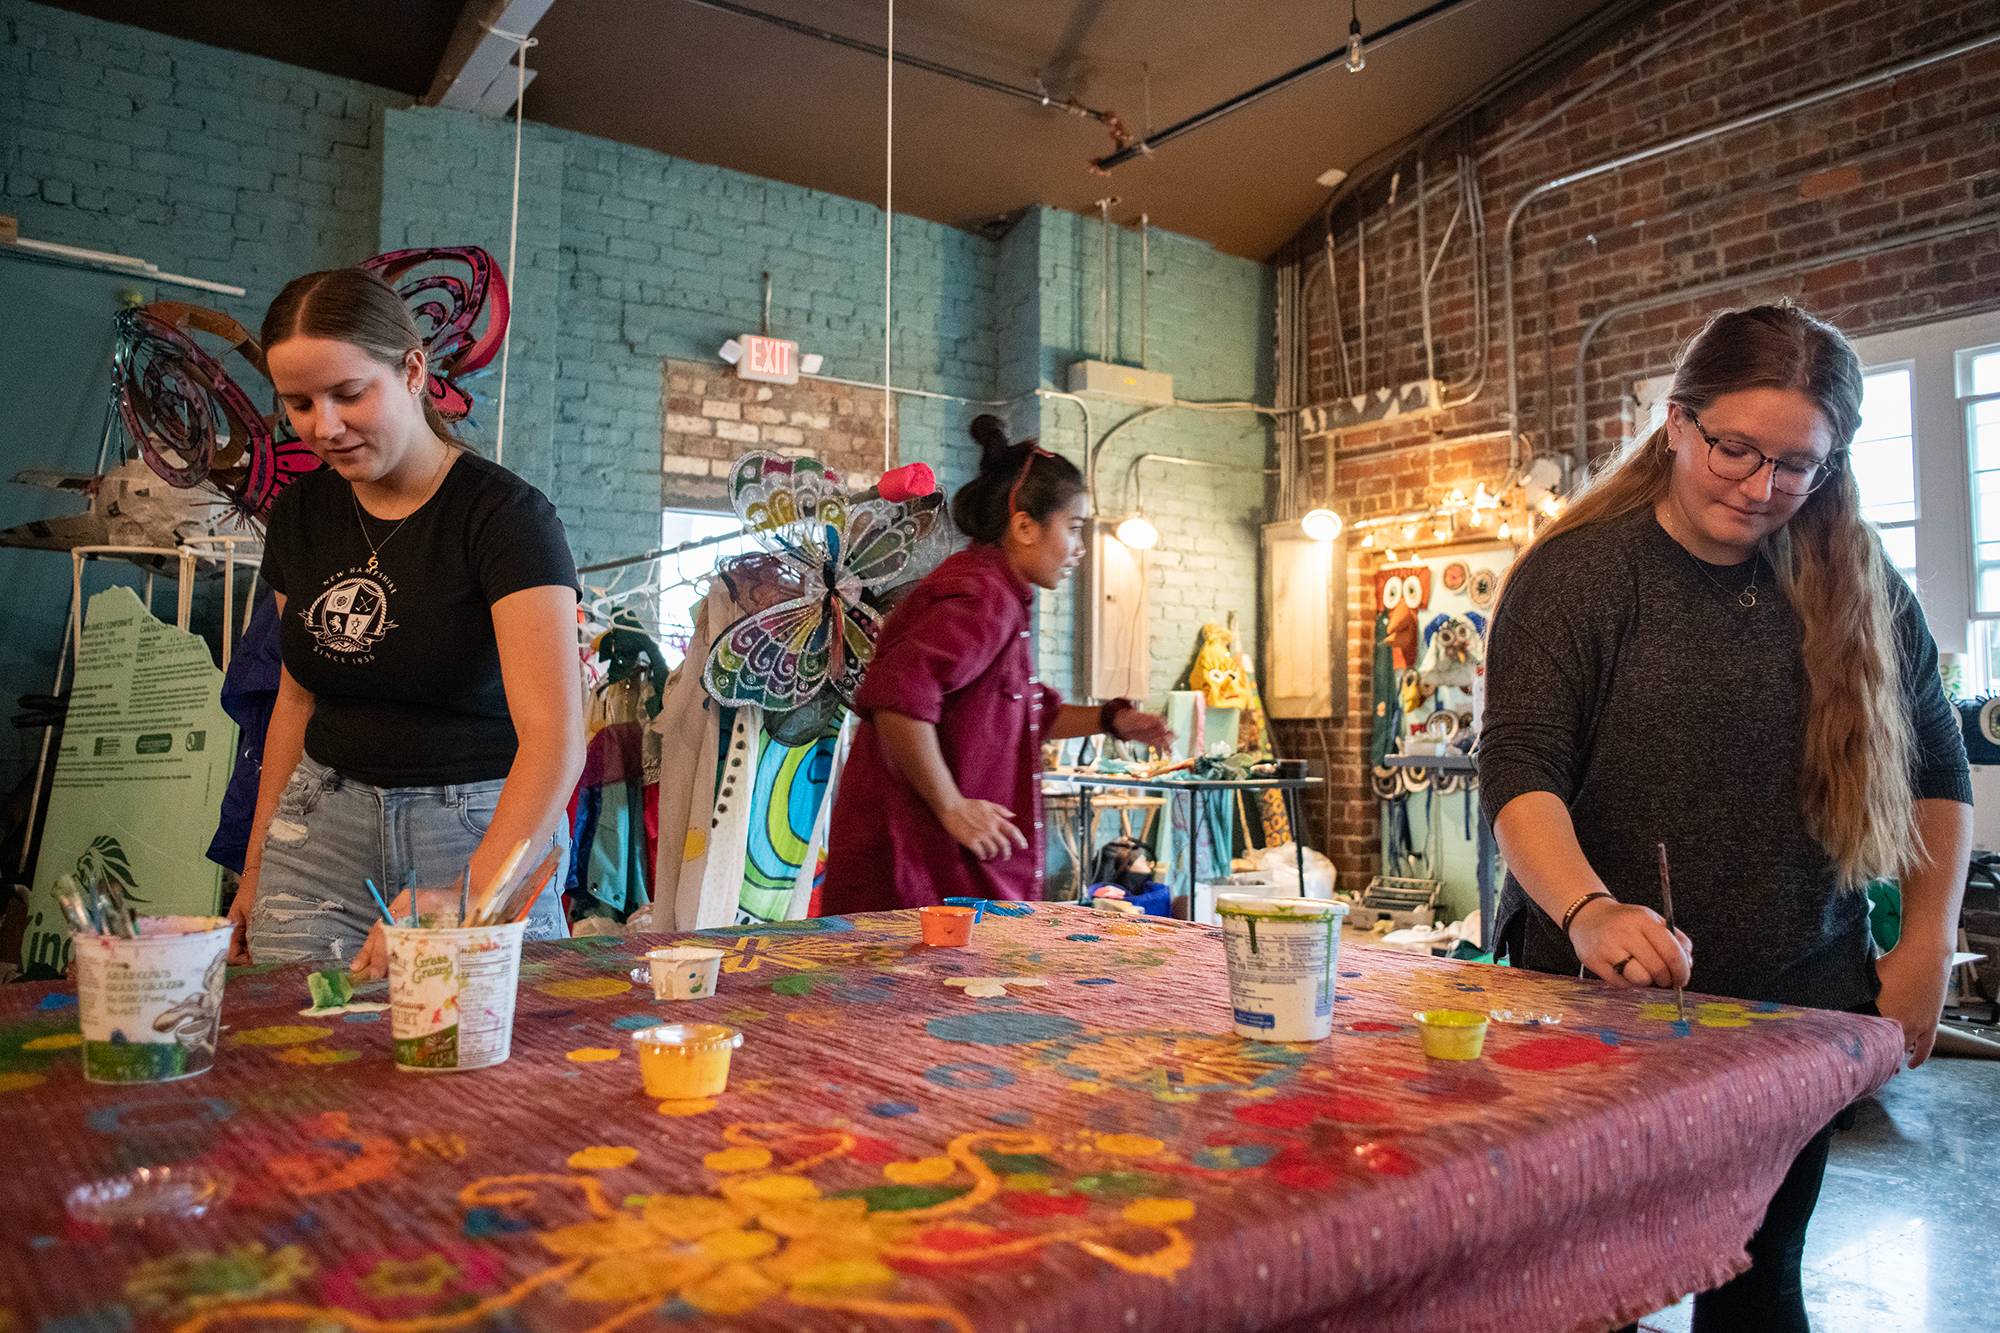 Members of an Ohio University learning community work together at the Central Venue to paint a banner to be used in the Honey for the Heart parade in Athens, Ohio.